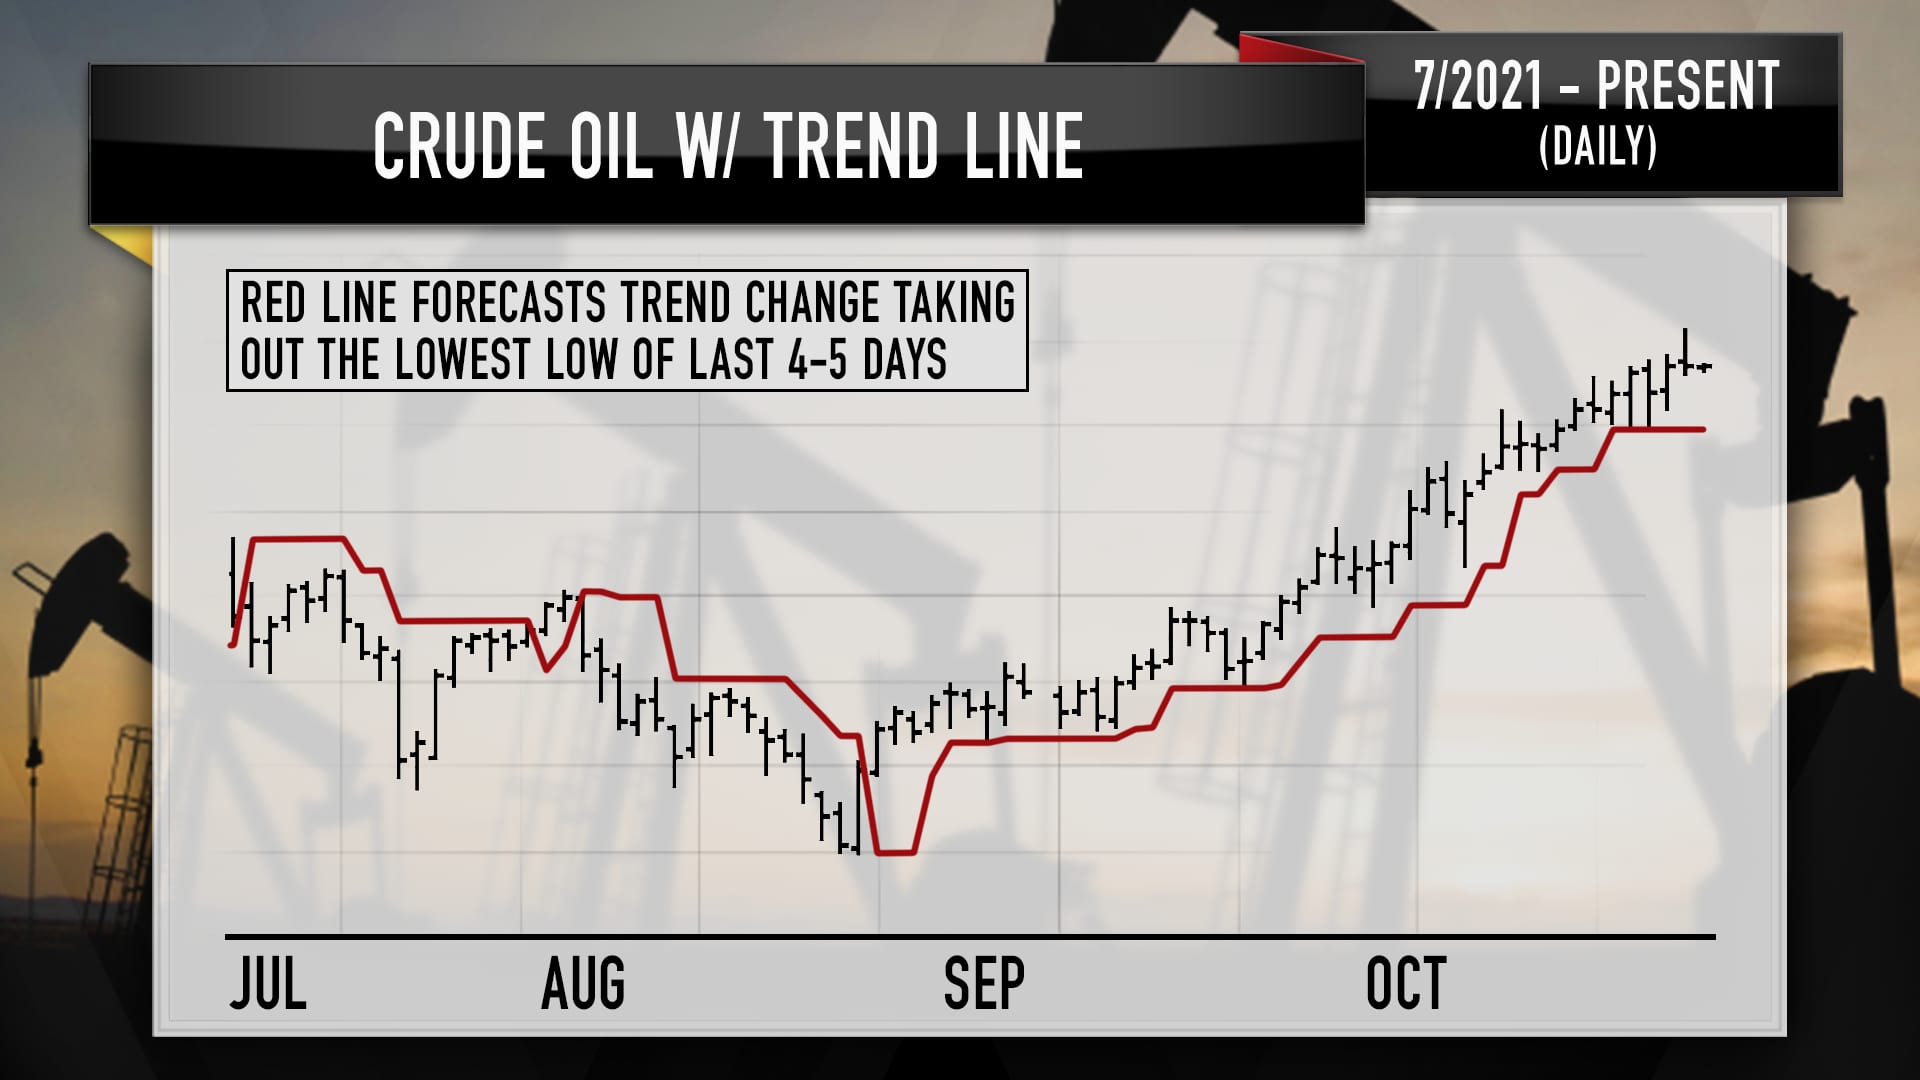 Crude oil with trend line, based on technical analysis from Larry Williams. CNBC